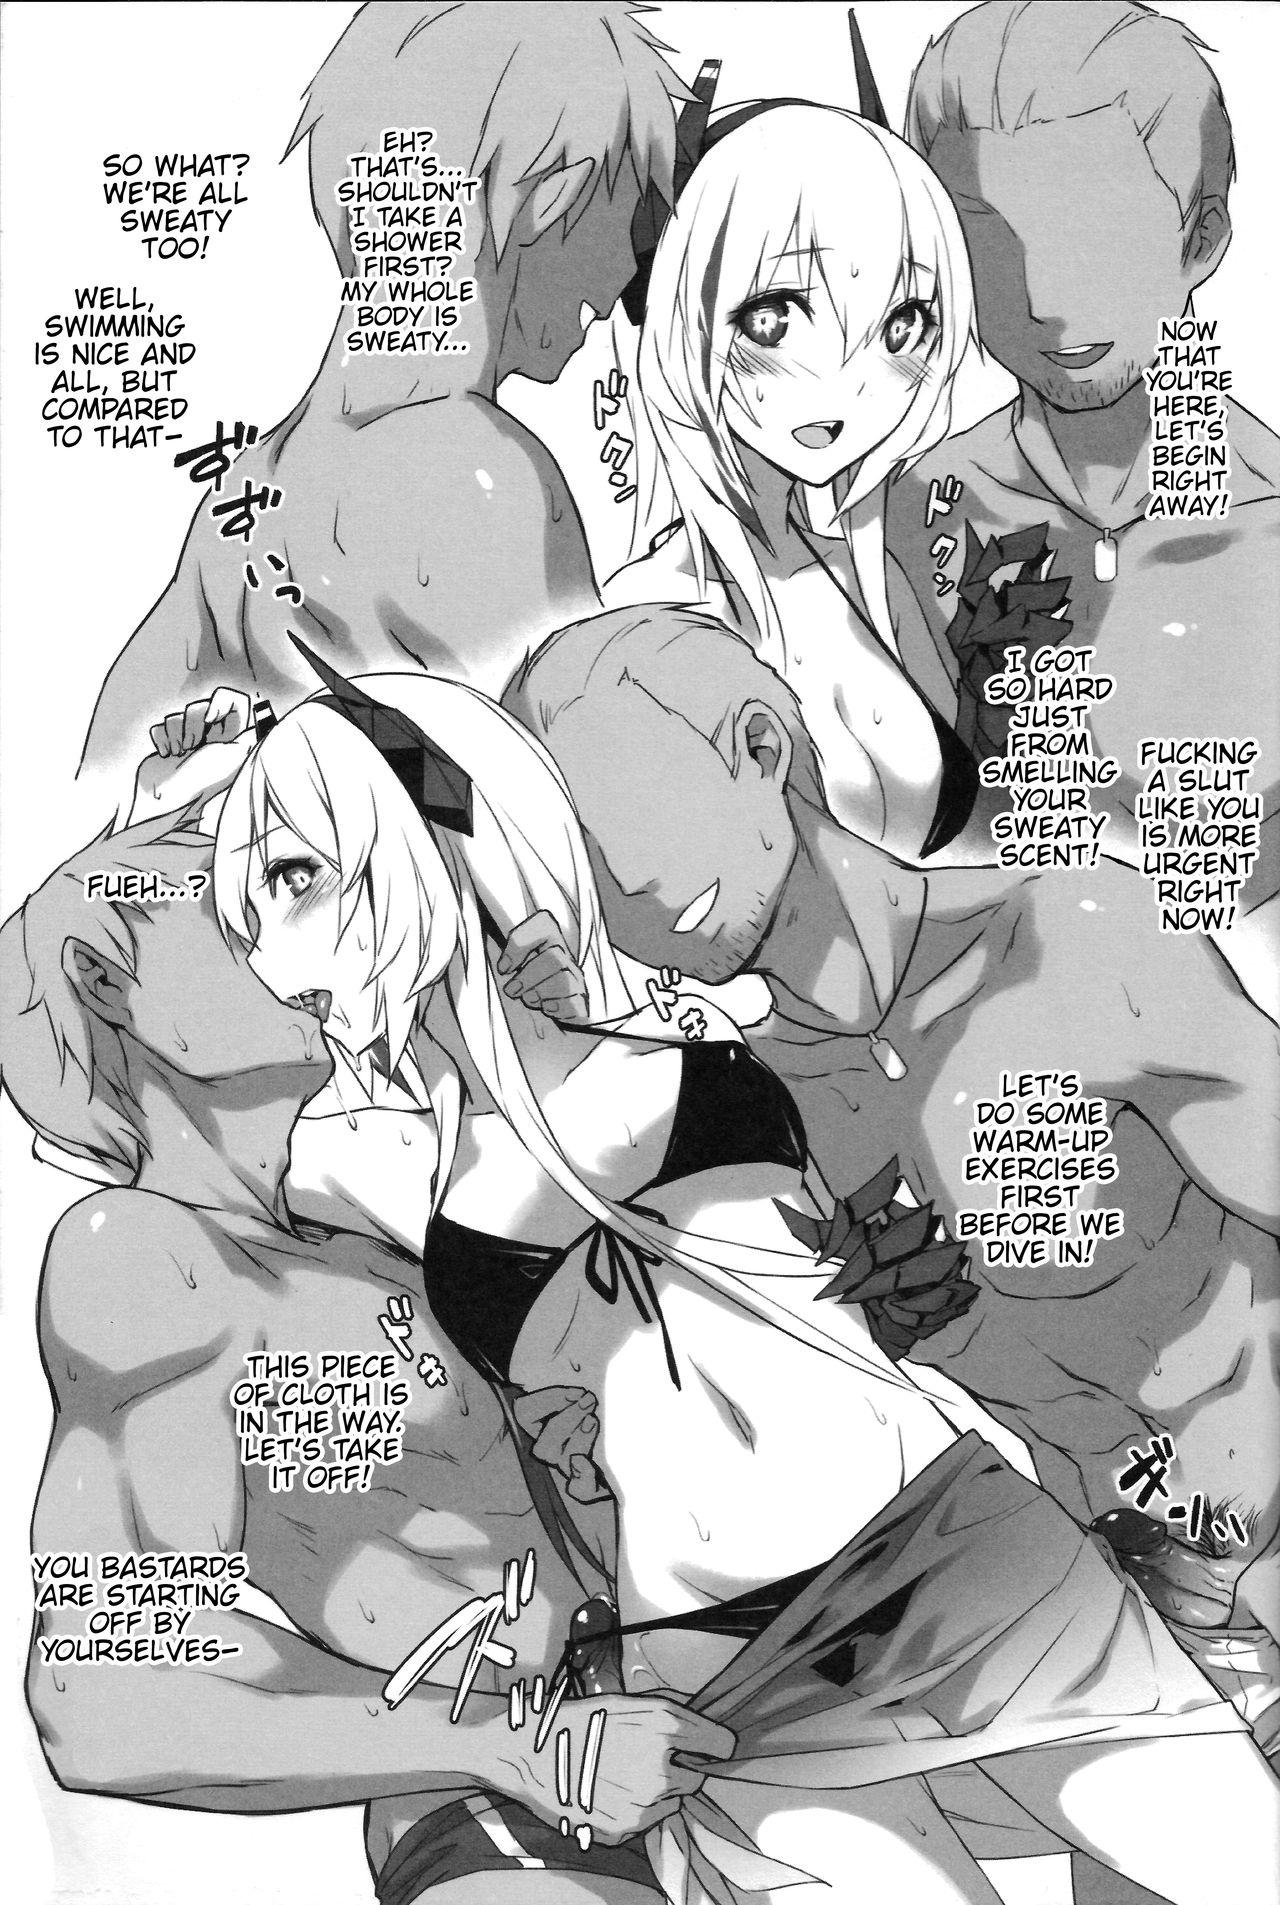 Blackcocks Grifon Summer Swimsuit Sex Party - Girls frontline 8teen - Page 4